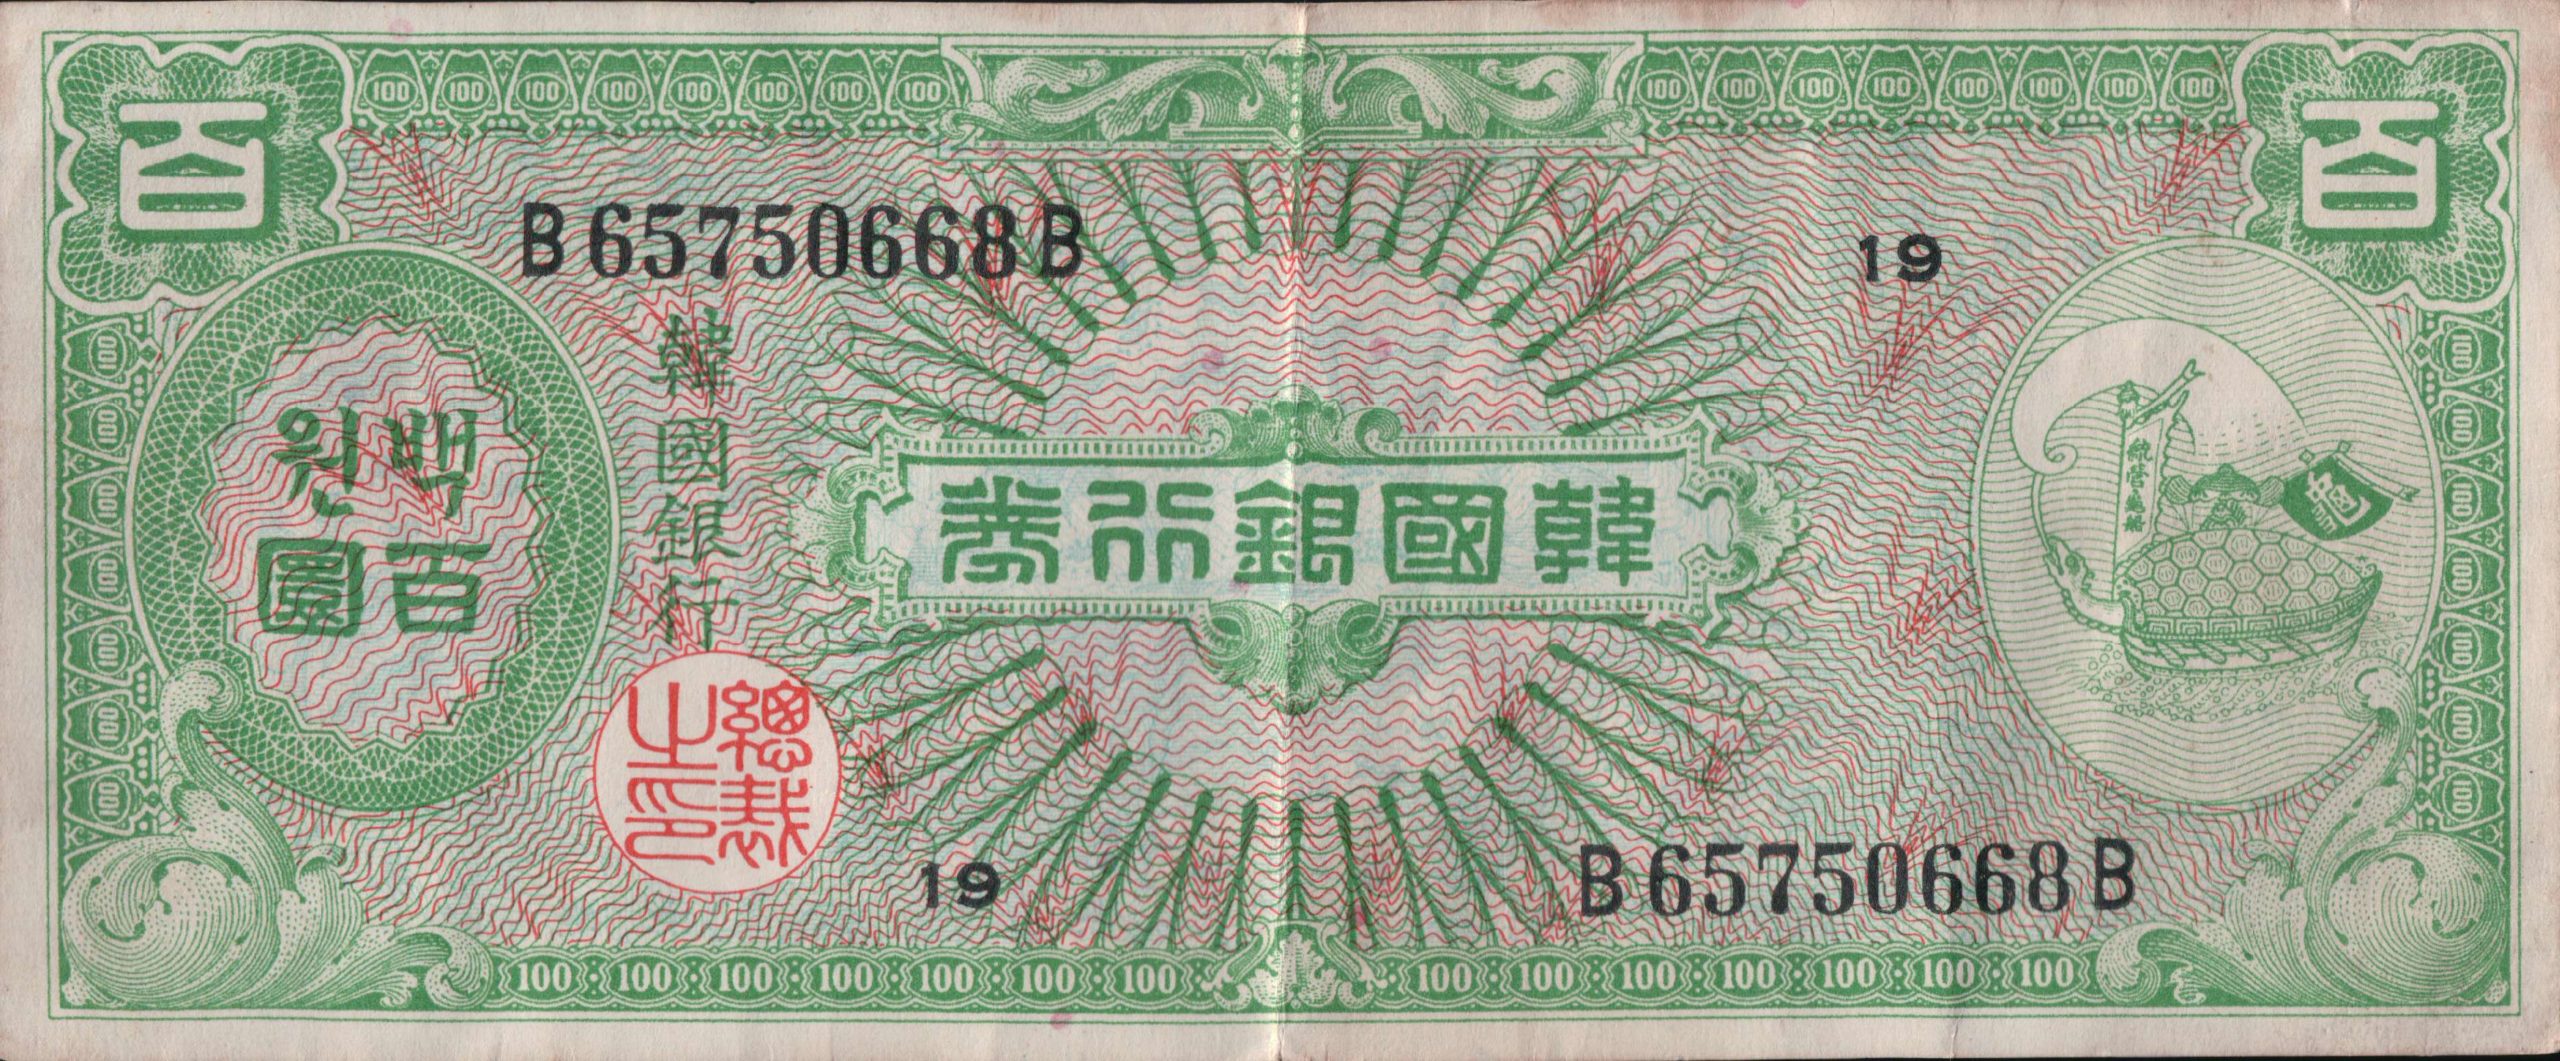 South Korean Currency